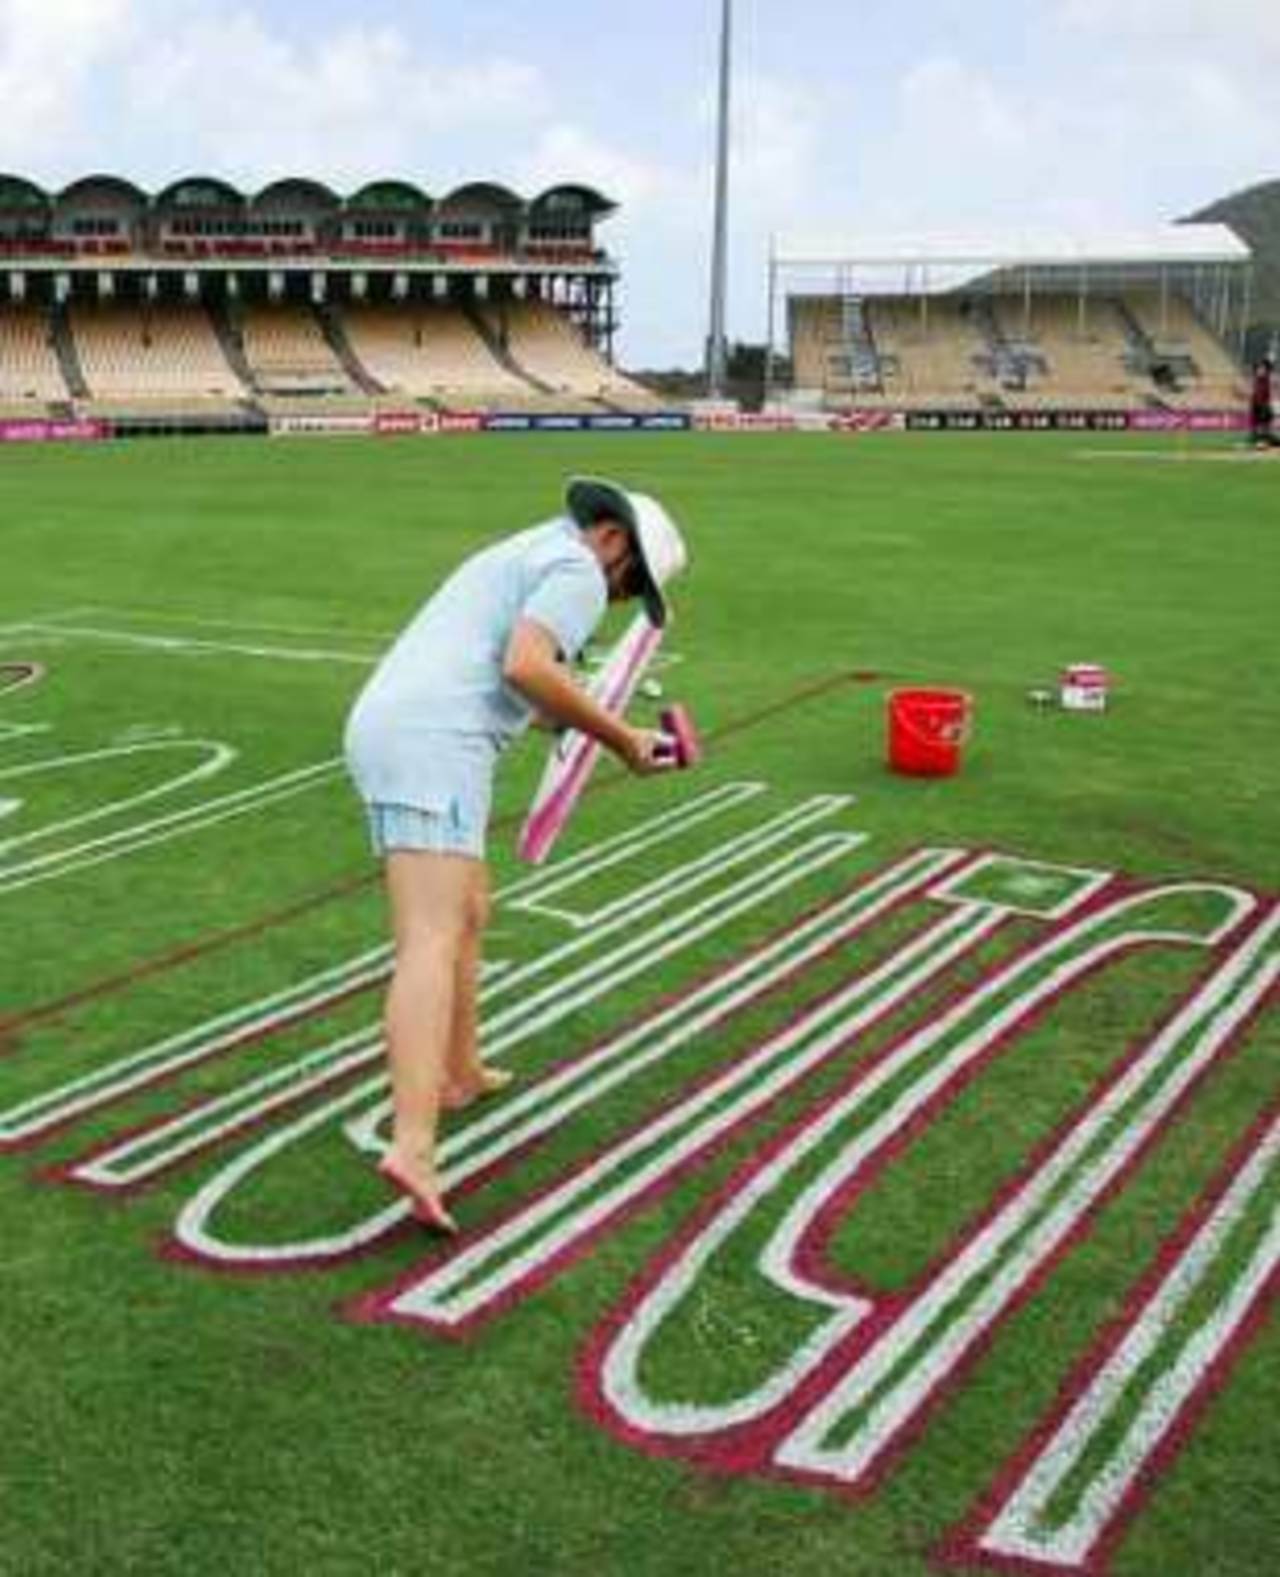 No level playing field: sponsors get their names painted on playing area they've bought&nbsp;&nbsp;&bull;&nbsp;&nbsp;AFP